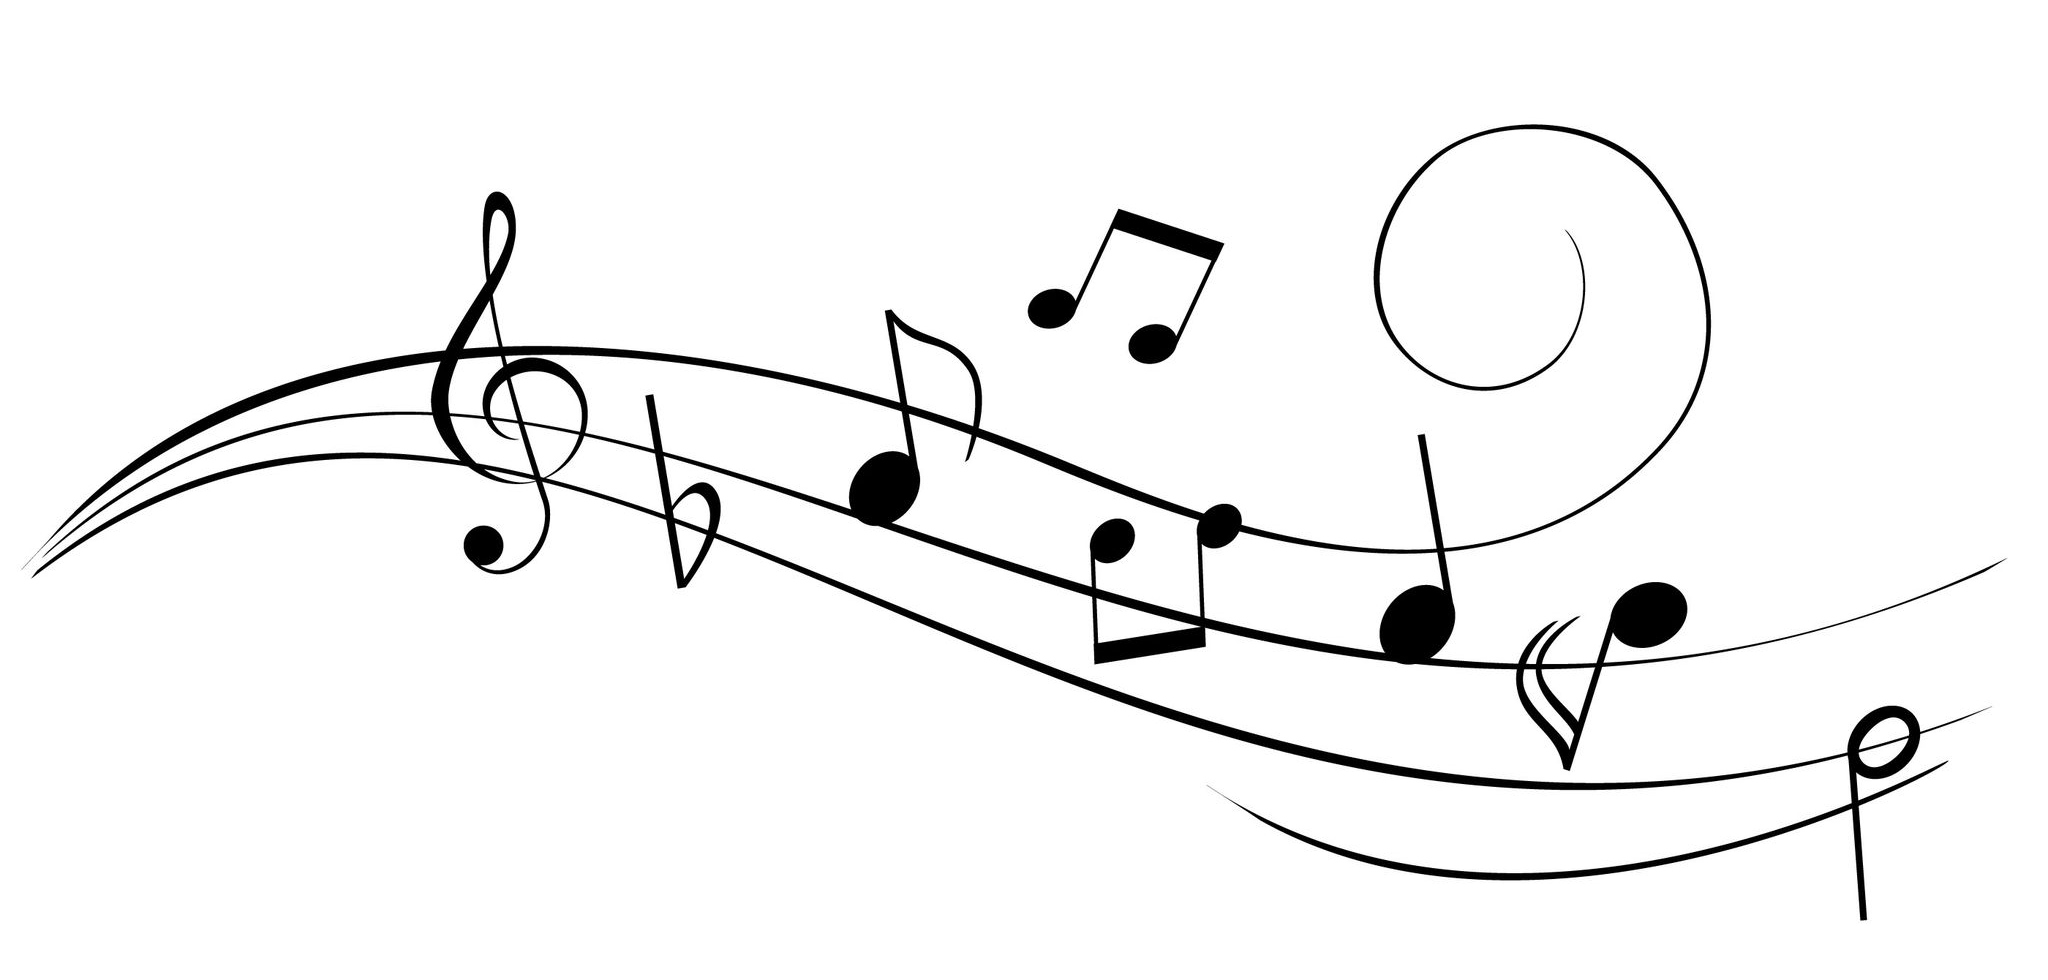 11 Black Musical Notes Free Cliparts That You Can Download To You    